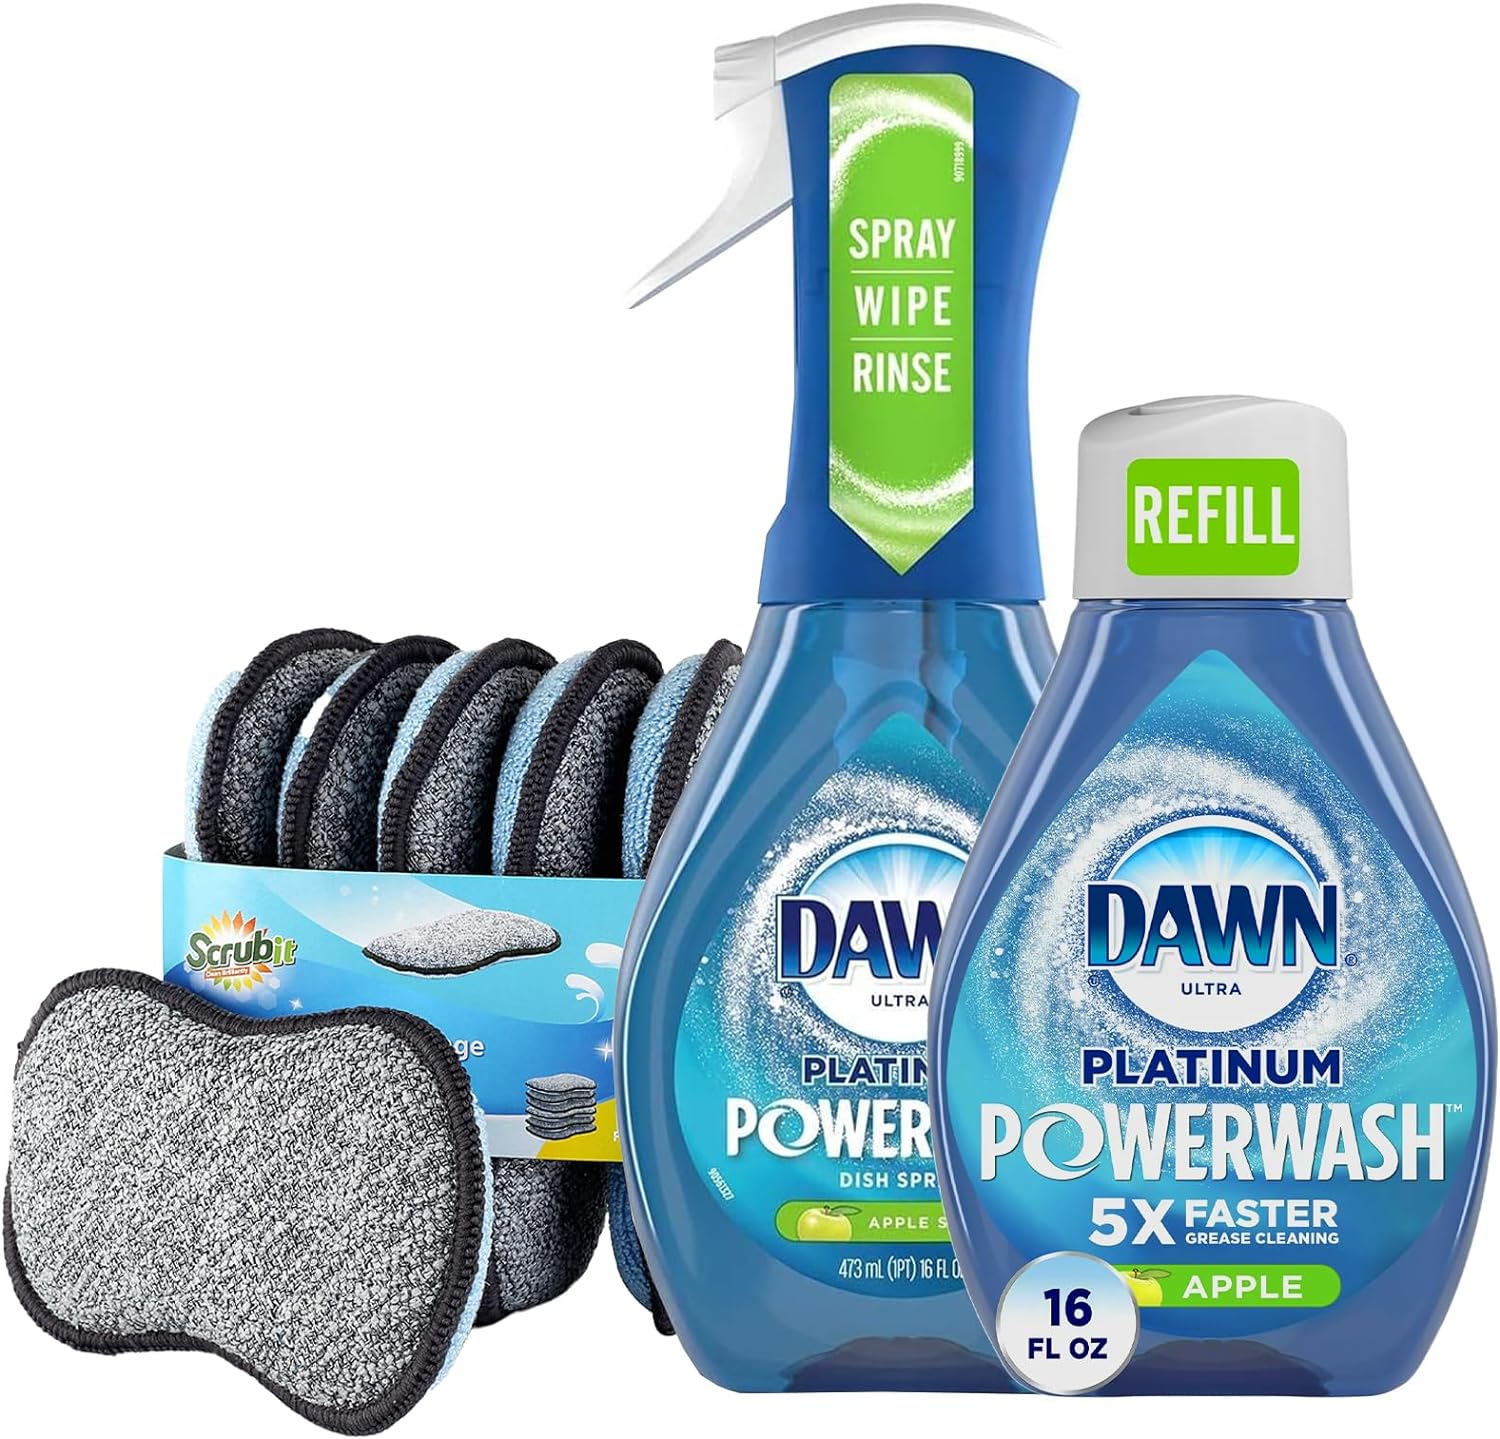 Dawn Powerwash Spray Platinum Dish Soap - Apple Scent + 1 Dawn Powerwash Refill, 16 fl oz each With 6 Multi-Purpose Scrub Sponges for Cleaning Dishes, Pots, and Pans